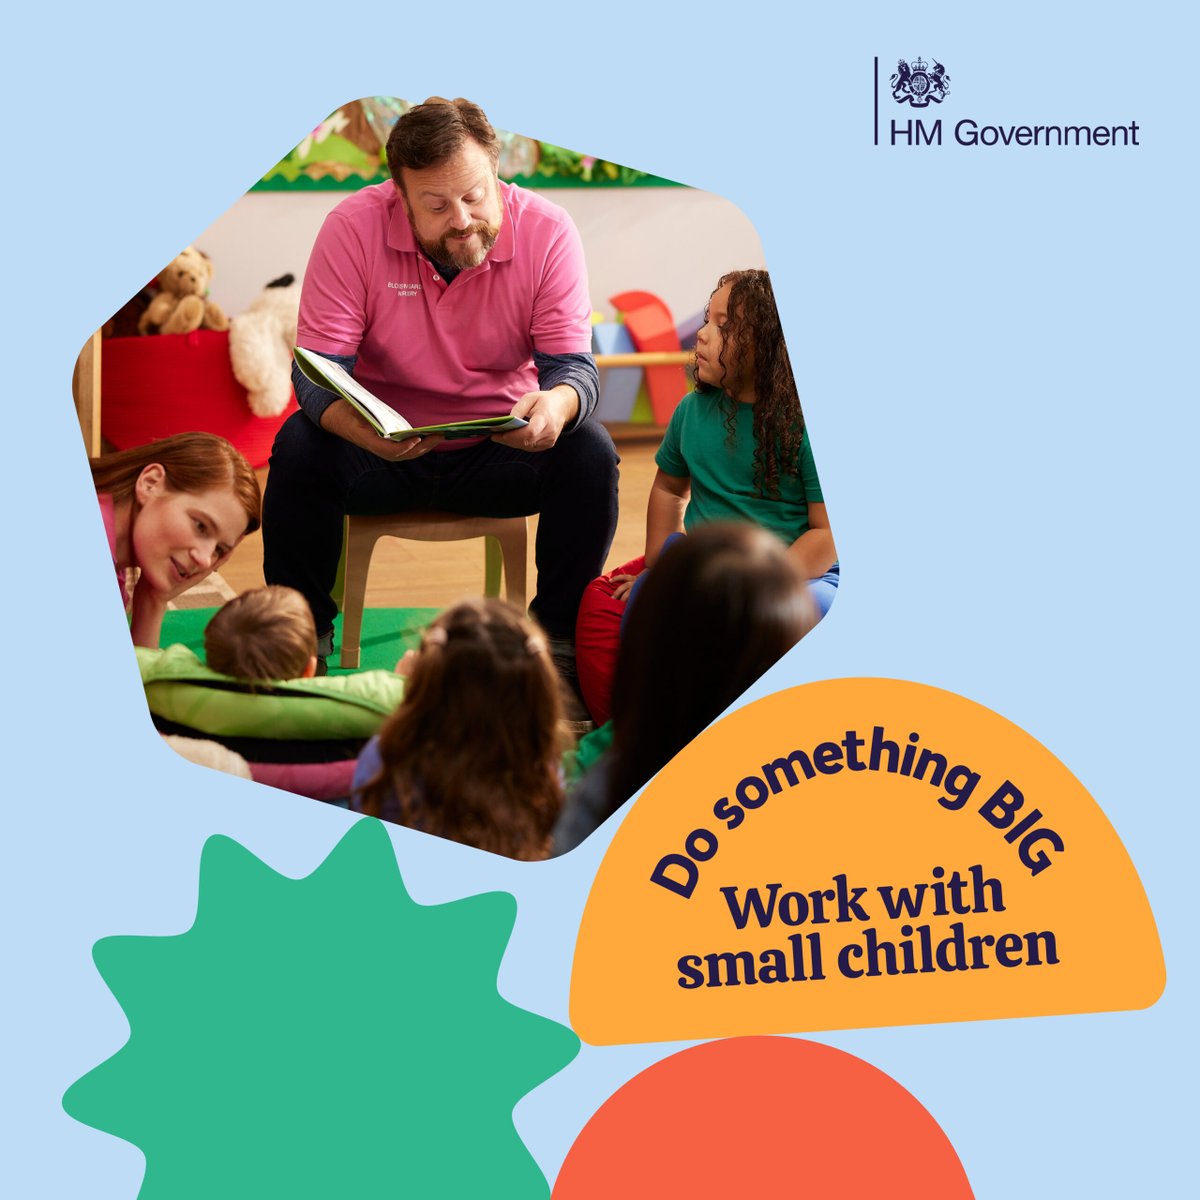 Use your imagination to bring theirs to life. #DoSomethingBig – work with small children Find out about a Level 3 Early Years Educator course at AEW bit.ly/3W1E37x ‘Search early years careers’ or visit the website earlyyearscareers.campaign.gov.uk bit.ly/4aCPbw5